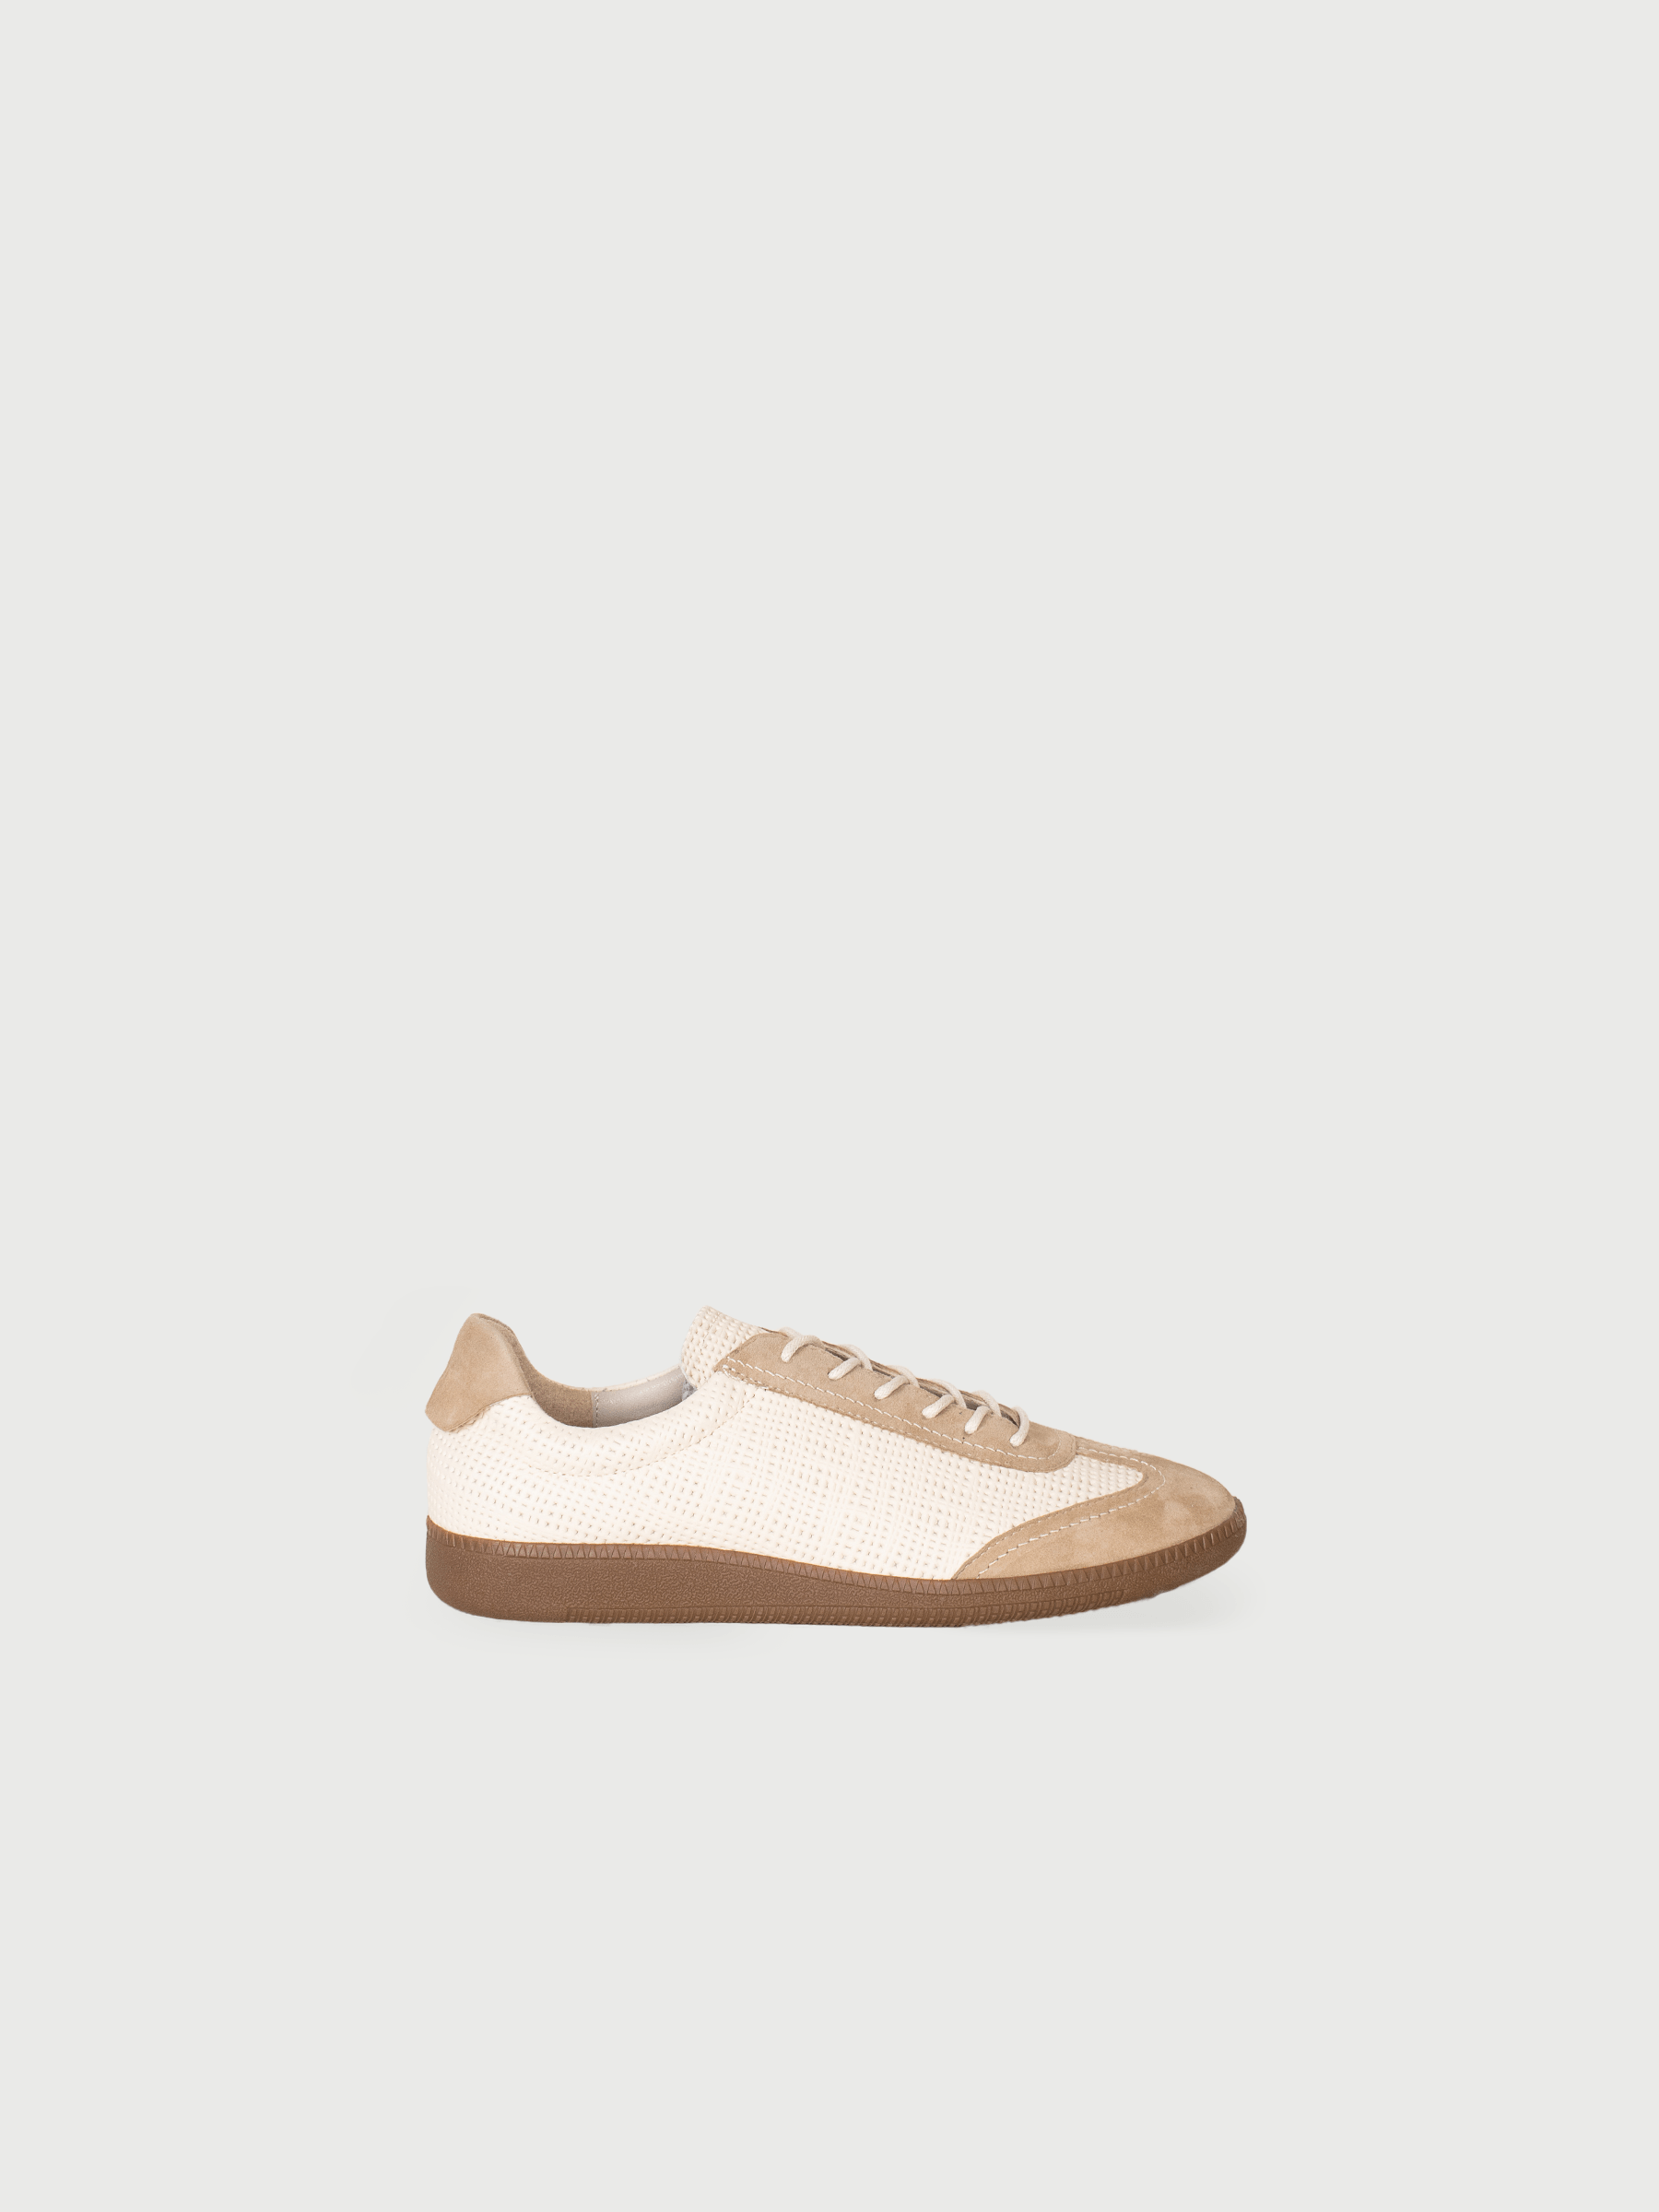 Woven Leather Sneakers